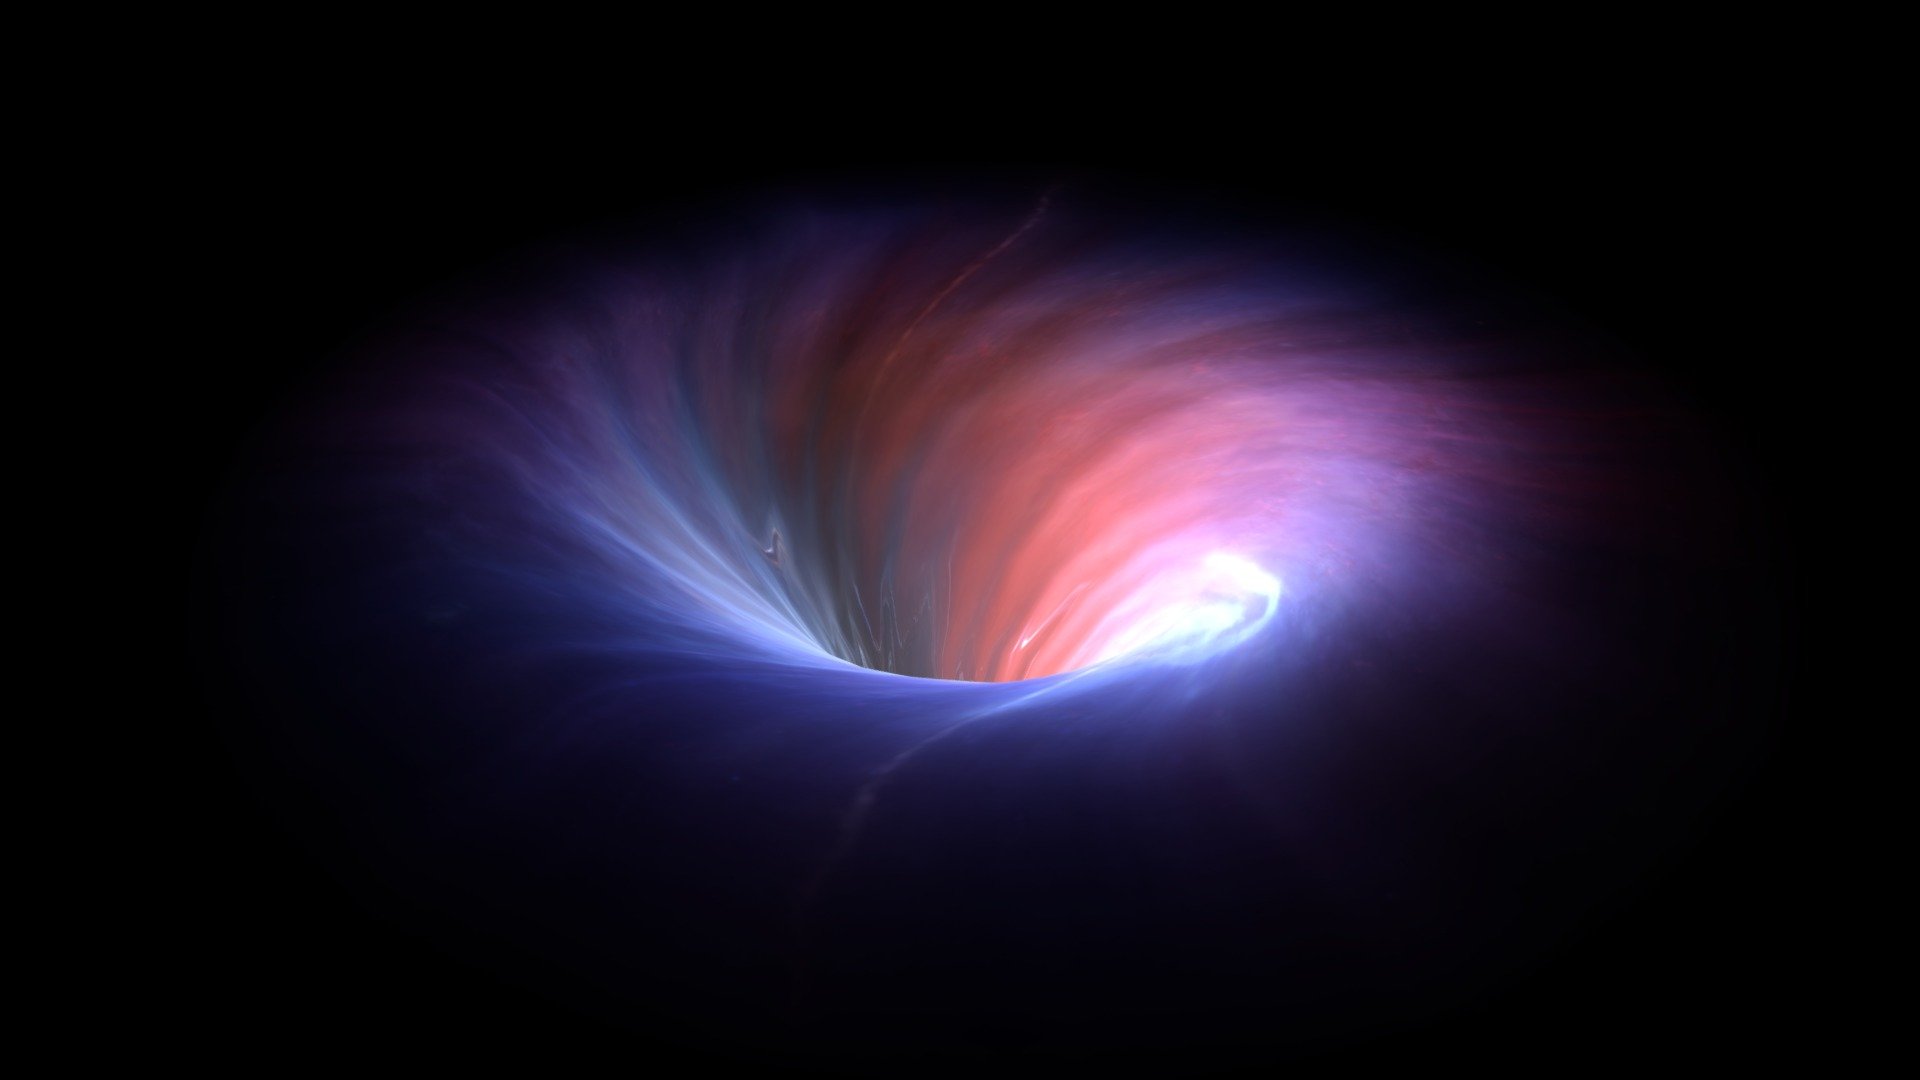 Animated Galaxy - Portal - Wormhole - blackhole.

other optimized effects in this collection:  https://skfb.ly/oQvyS - Galaxy Space Portal Black Hole - Buy Royalty Free 3D model by tamminen 3d model